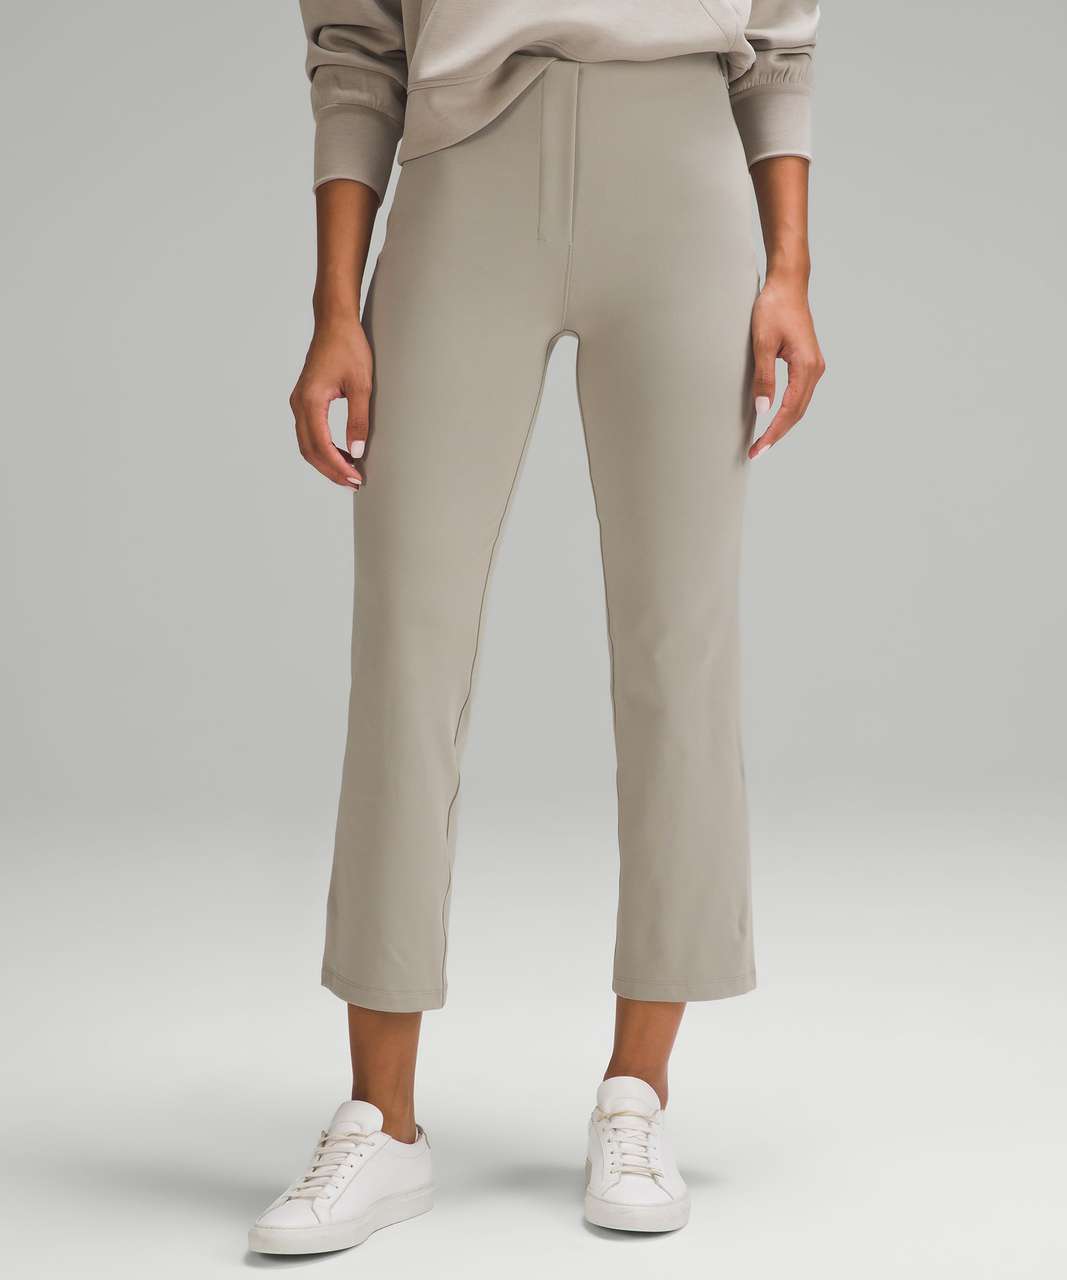 Lululemon Smooth Fit Pull-On High-Rise Cropped Pant - Riverstone